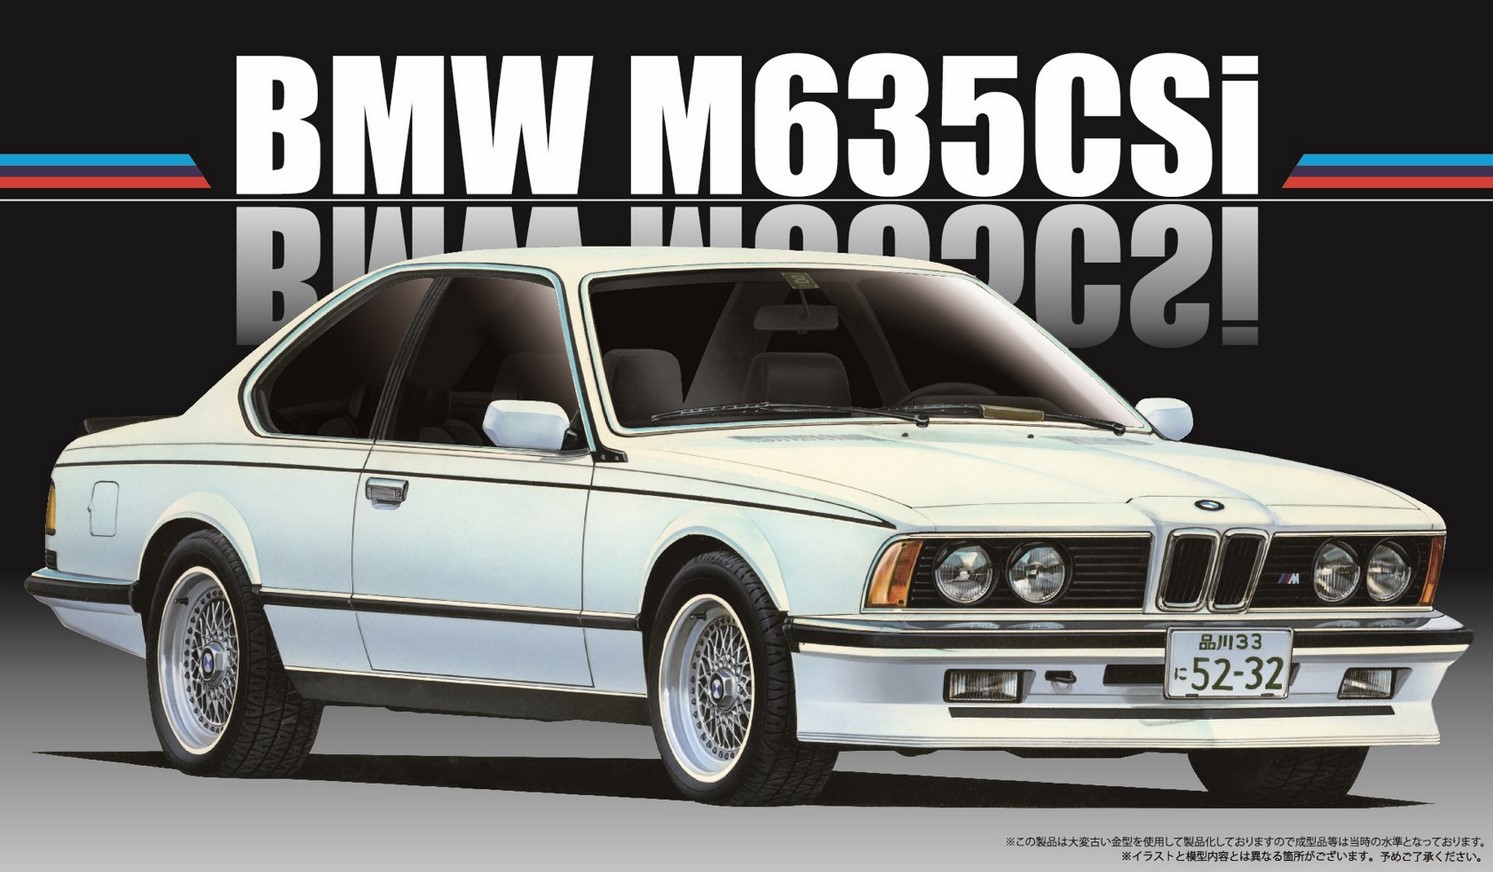 How to Build a Small BMW E30 M3 - Step by Step Fujimi Car Build